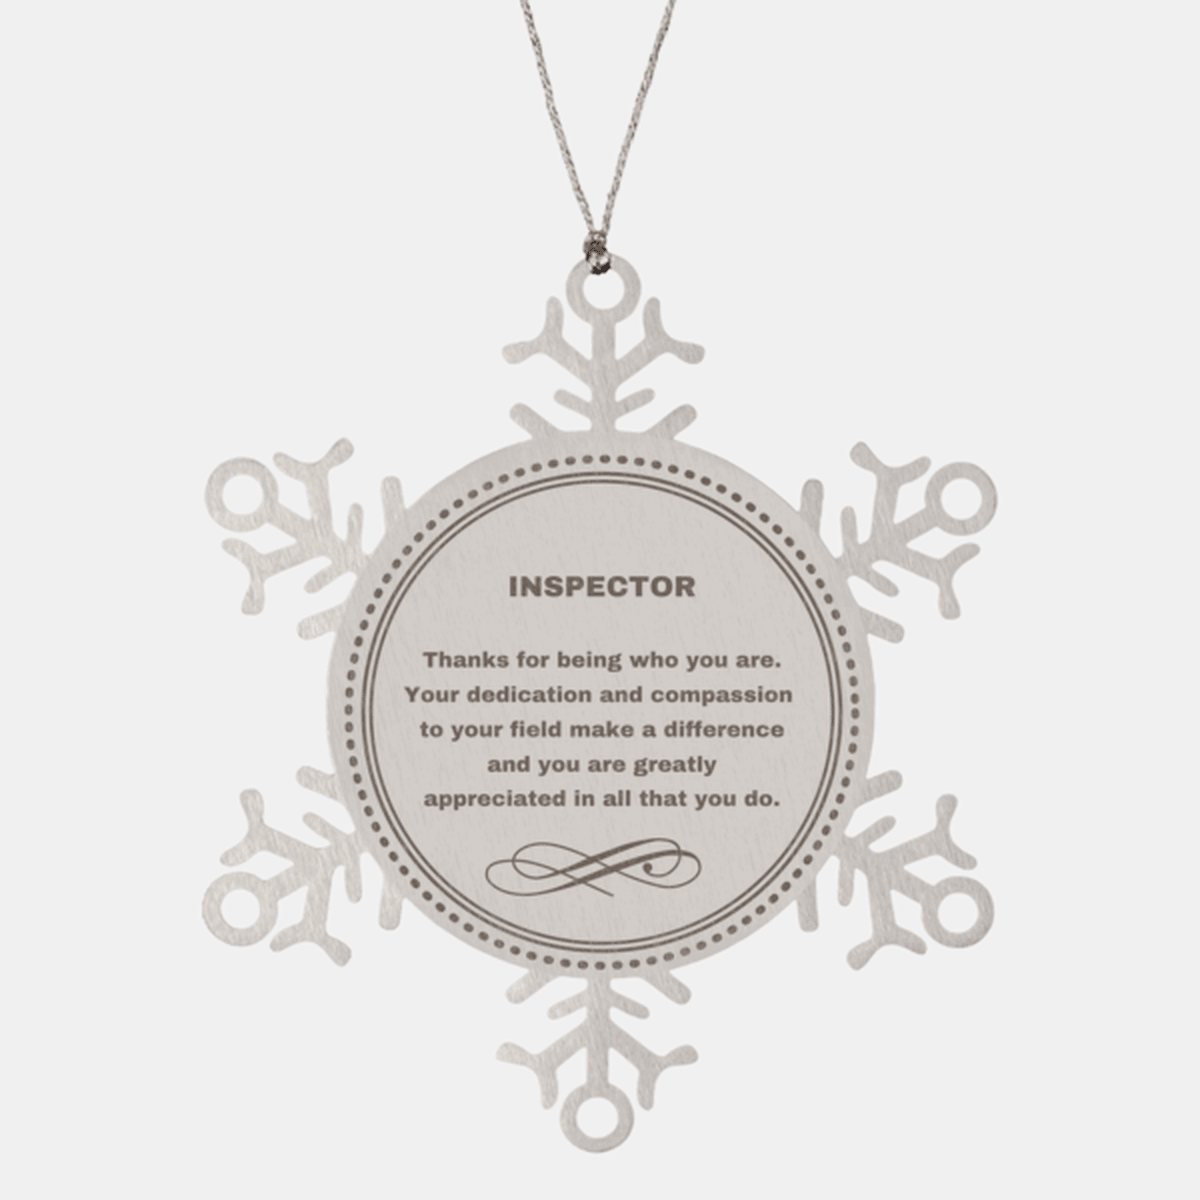 Inspector Snowflake Ornament - Thanks for being who you are - Birthday Christmas Jewelry Gifts Coworkers Colleague Boss - Mallard Moon Gift Shop